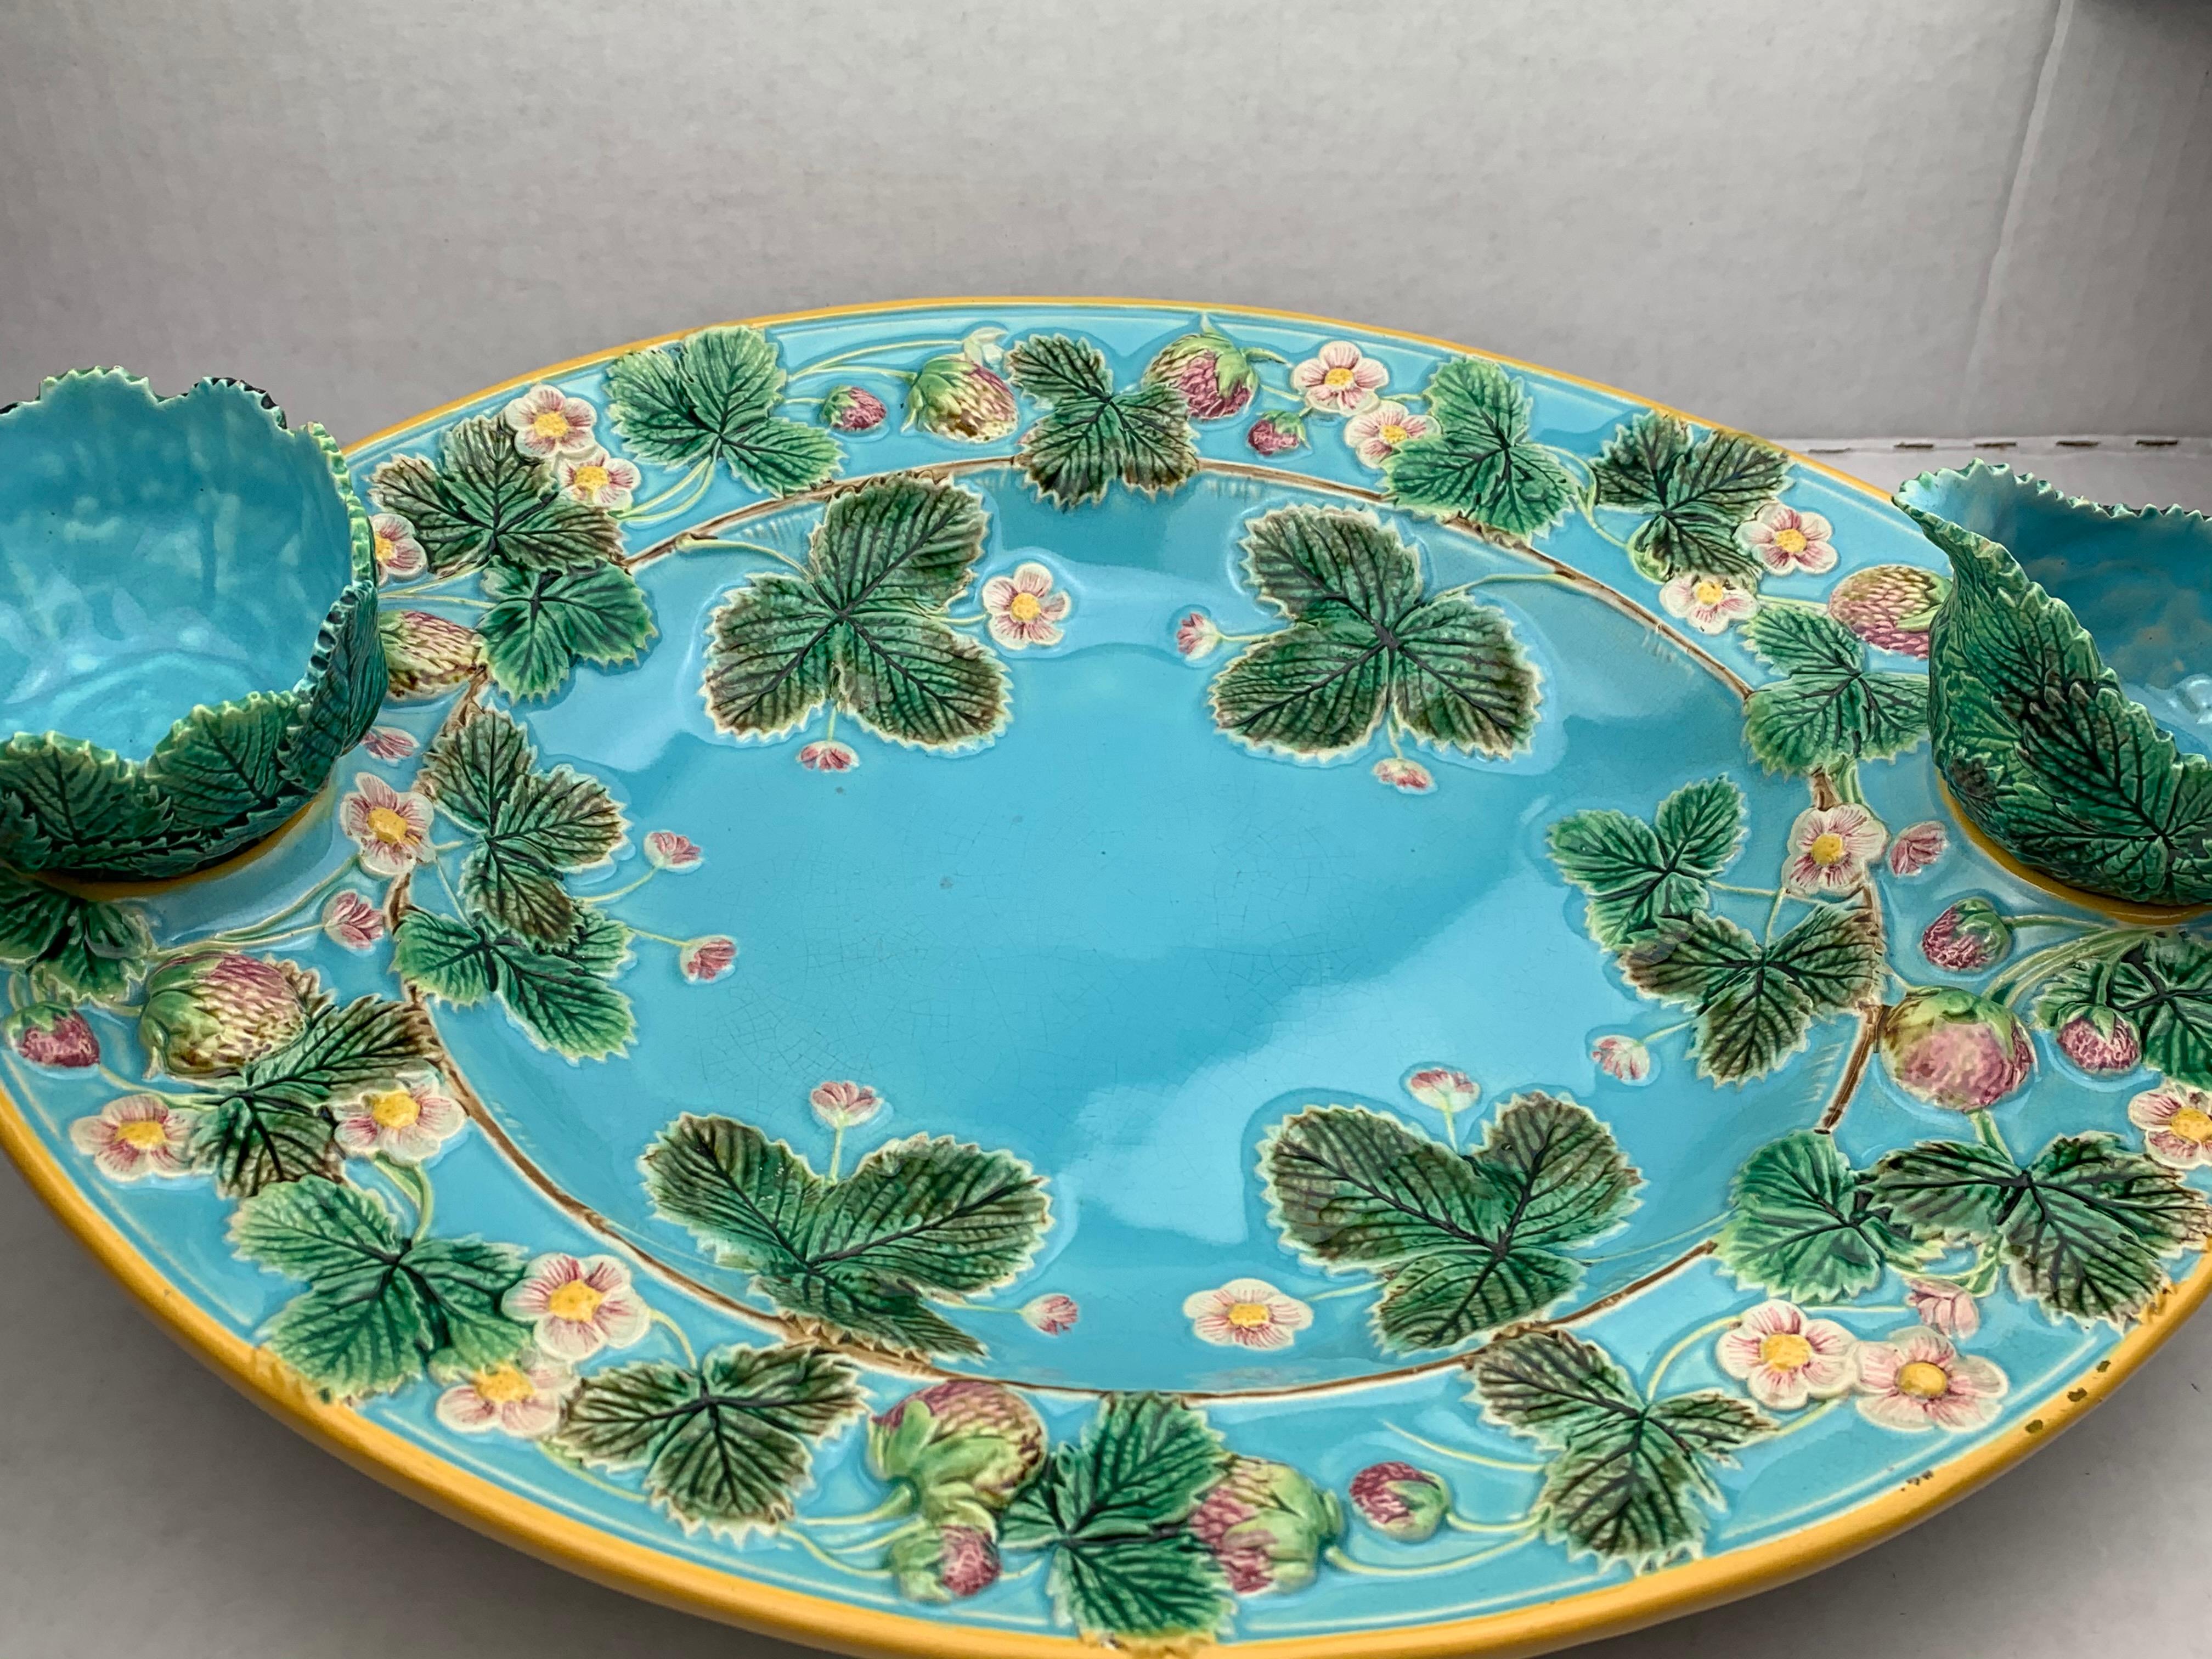 George Jones Majolica strawberry server with separate cream and sugar, English, 1879. Naturalistically molded strawberries, strawberry leaves and blossoms to the inner and outer border, the center bowl and ground glazed in deep turquoise blue, with